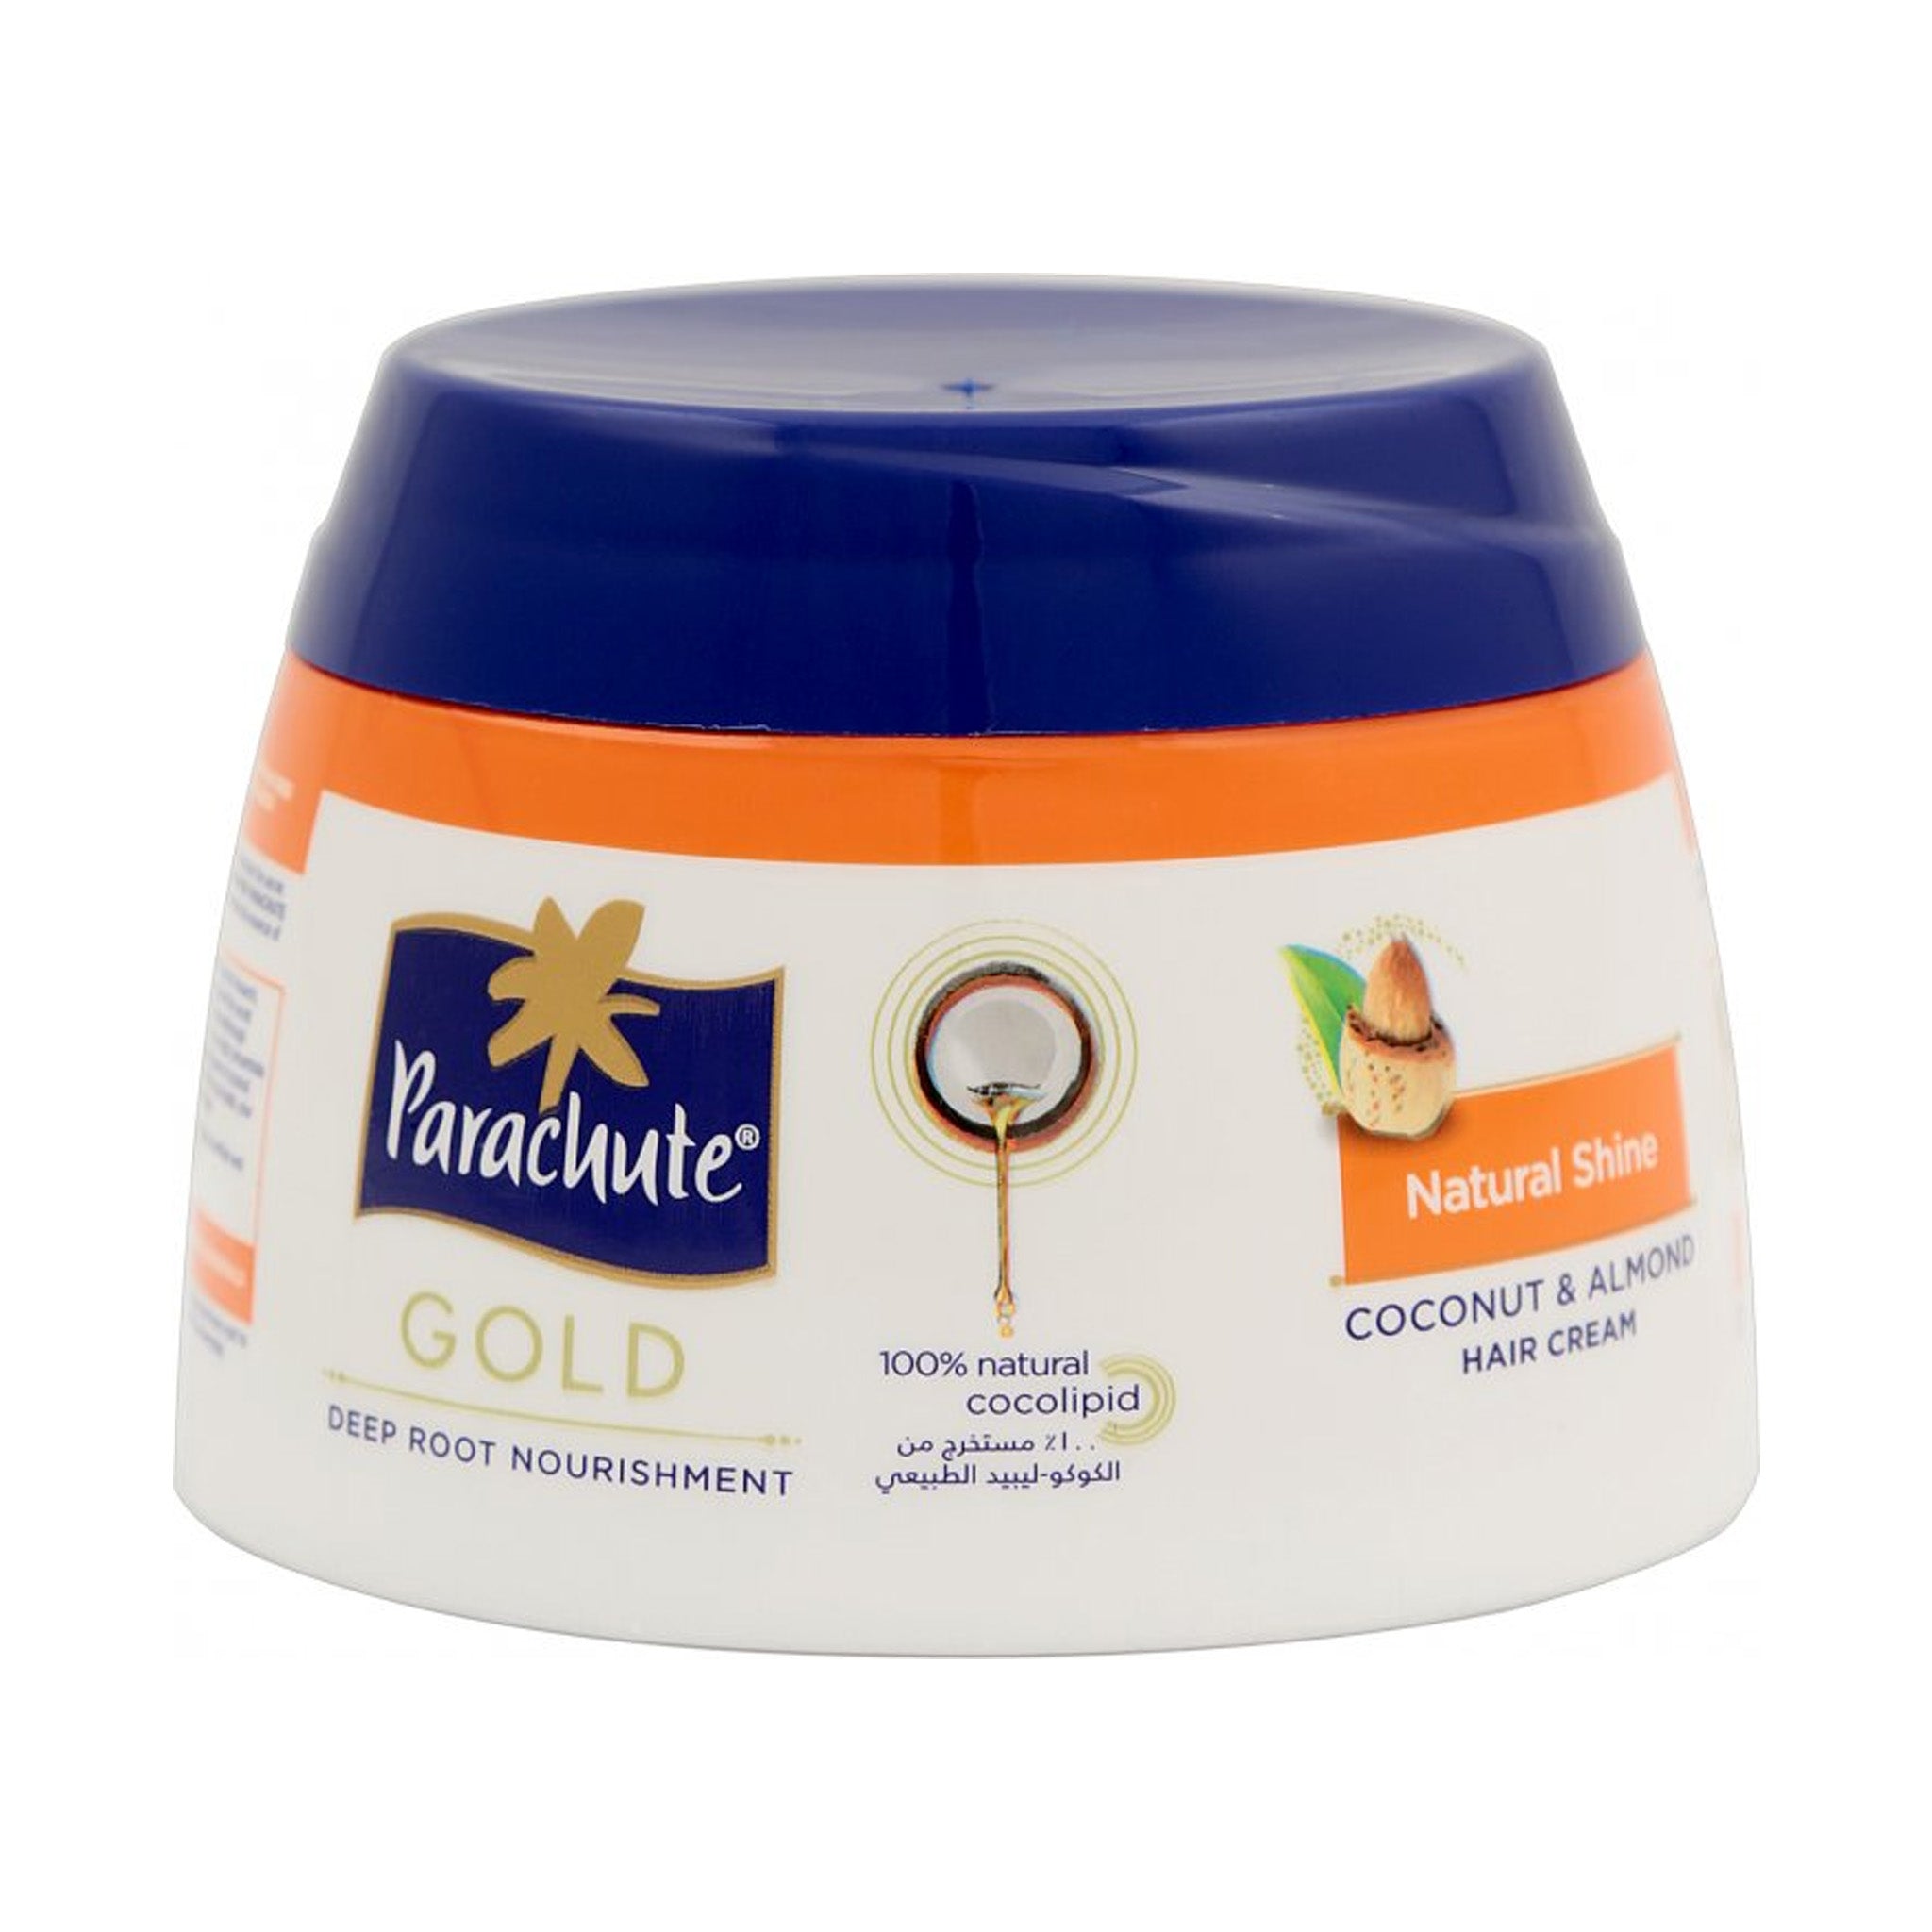 Parachute Advansed After Shower Non Sticky Hair Cream, 100 gm Price, Uses,  Side Effects, Composition - Apollo Pharmacy